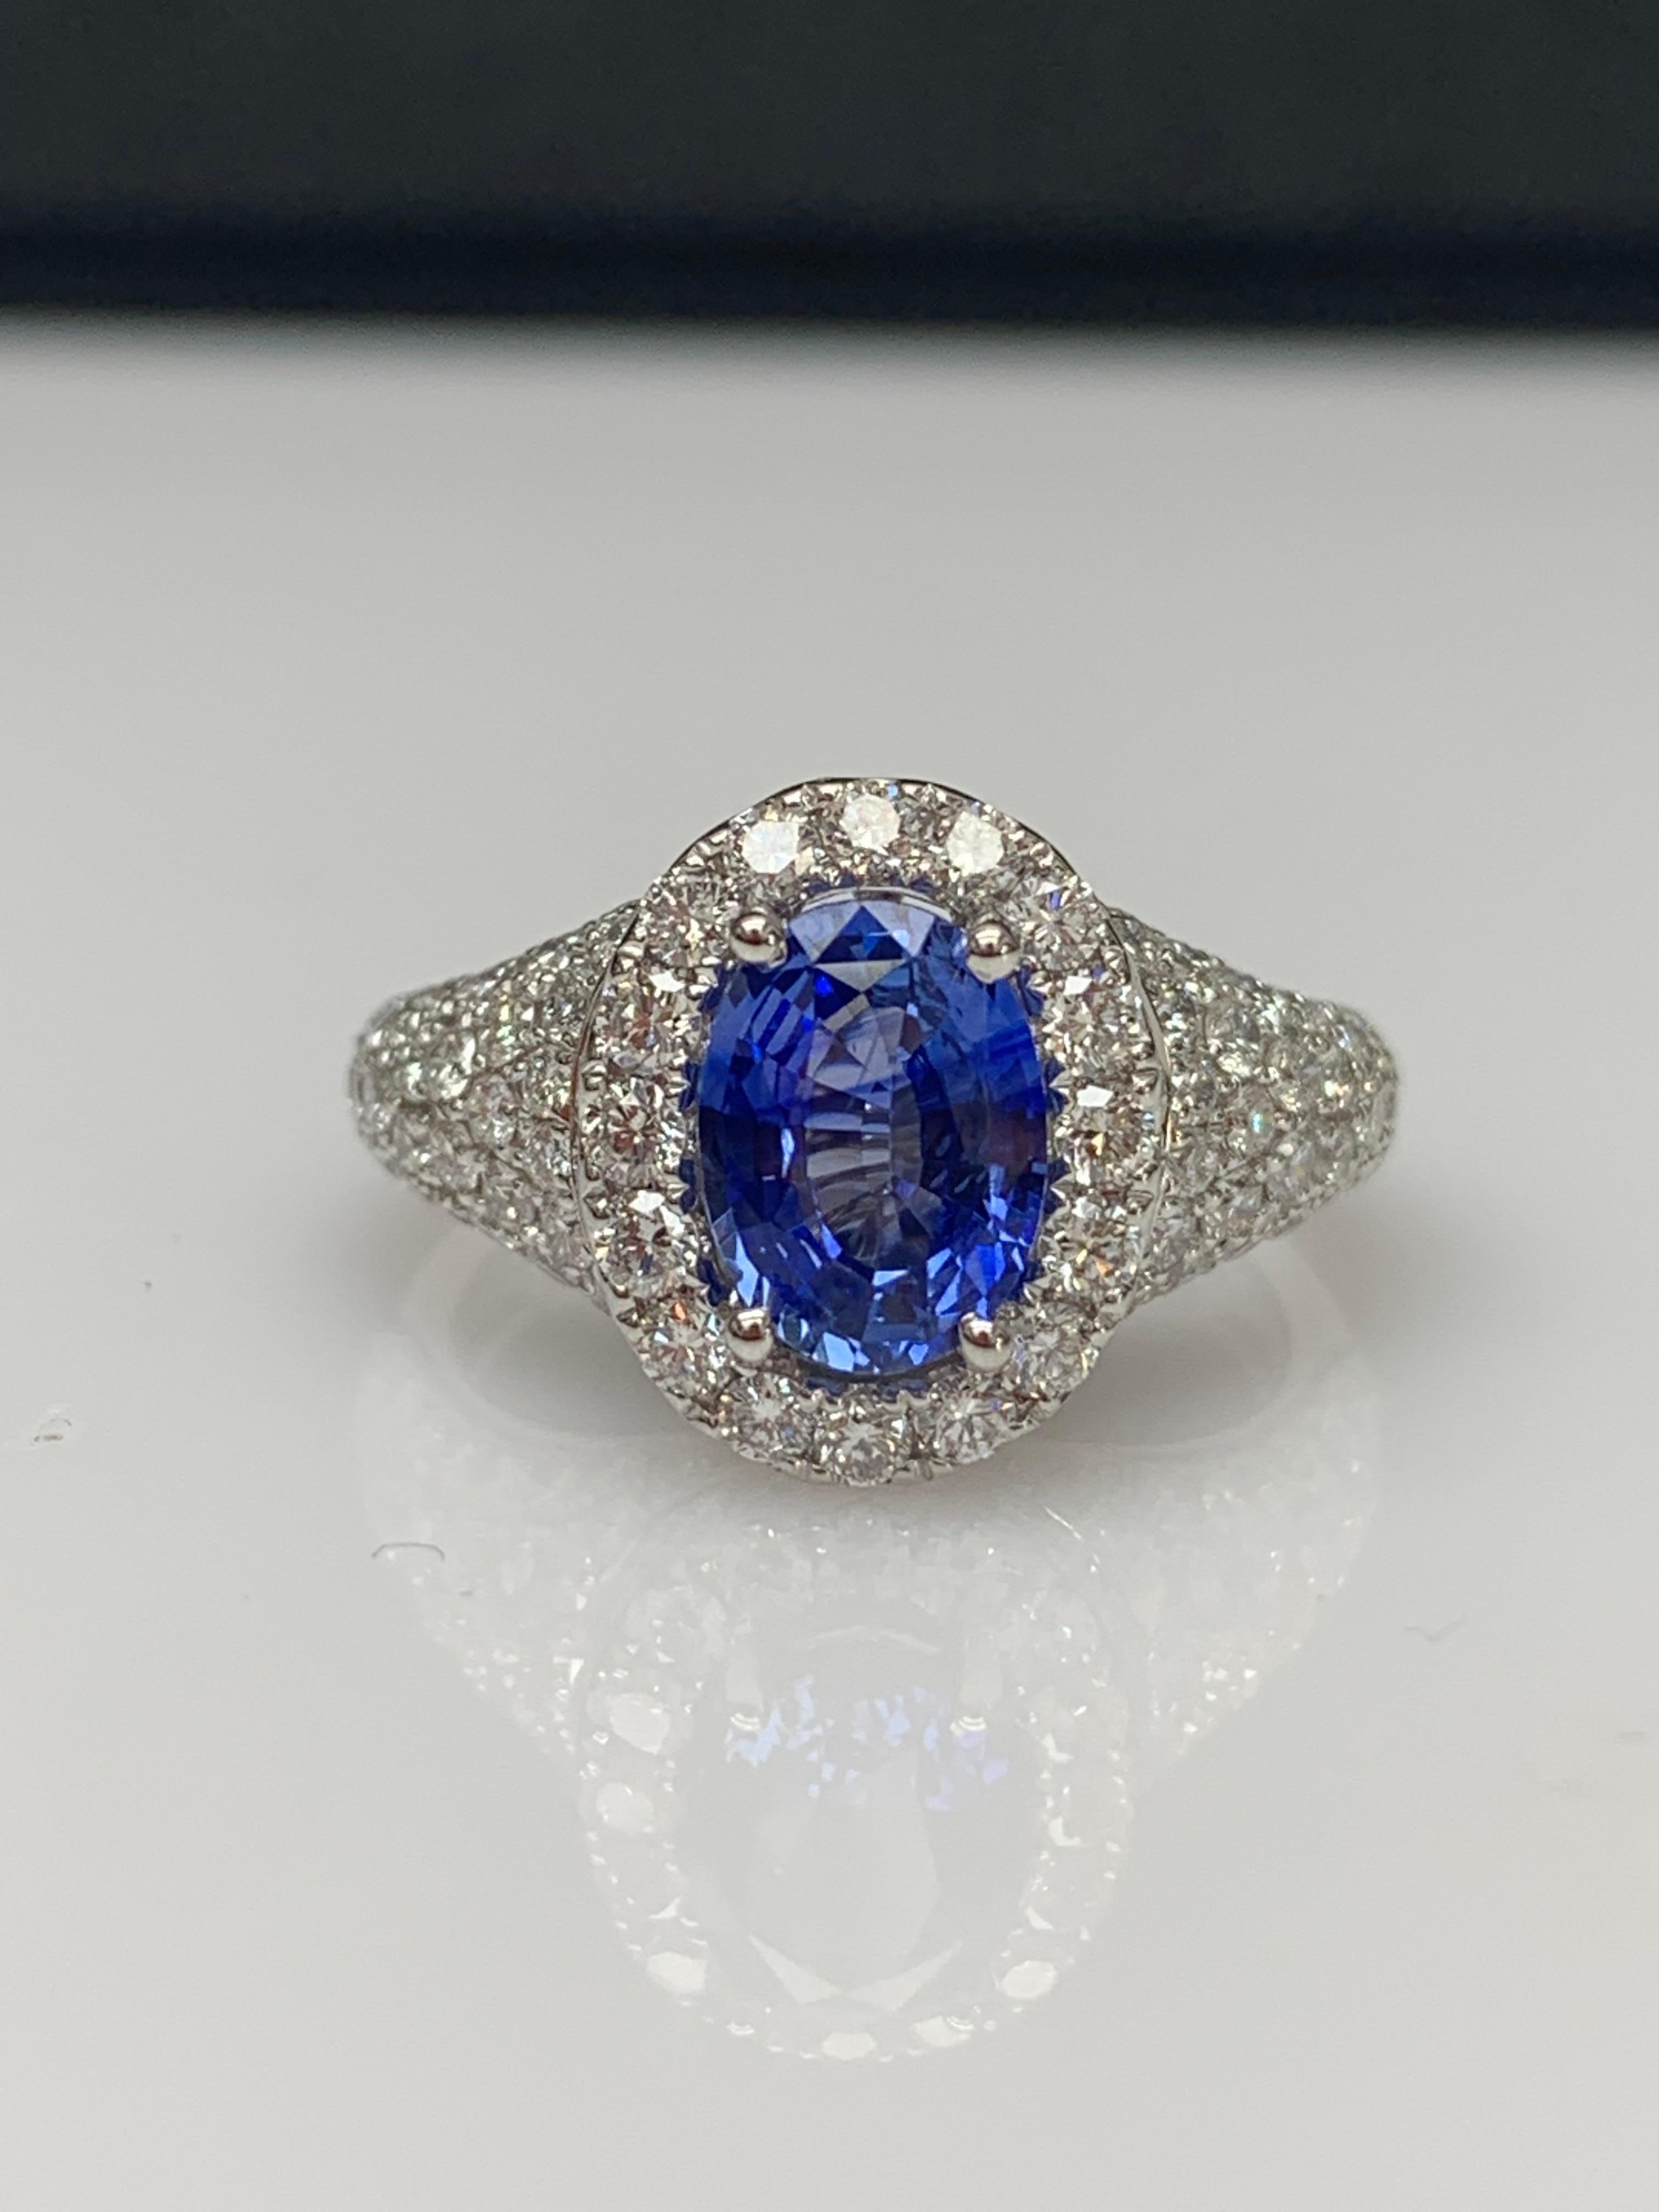 Modern 1.27 Carat Oval Cut Blue Sapphire and Diamond Fashion Ring in 18K White Gold For Sale